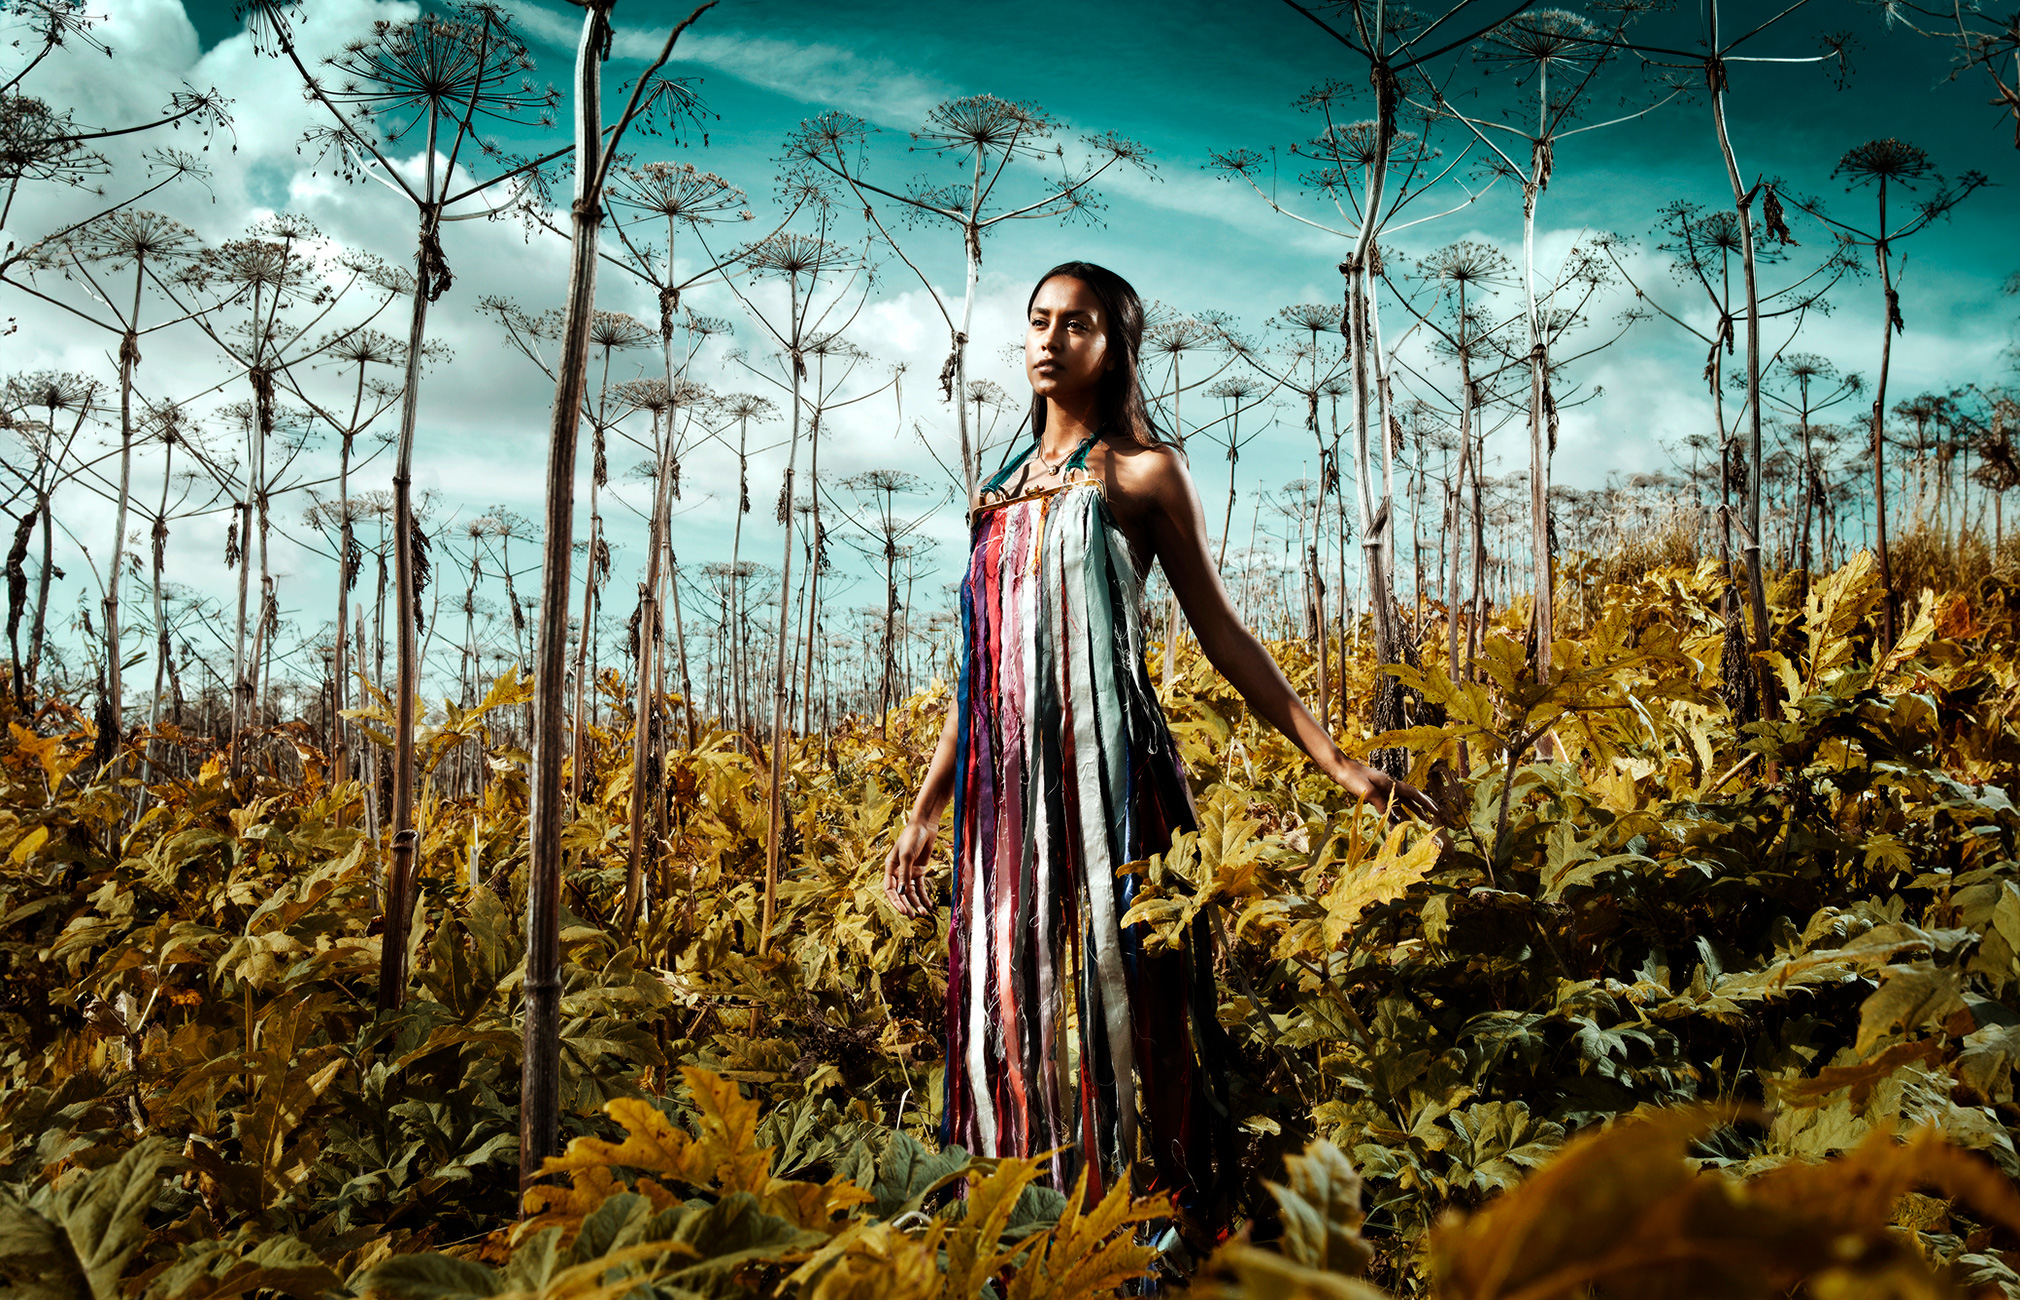 A person in a colorful dress standing in the middle of a field of giant hogweeds. The background is dominated by thin, tall giant hogweeds. The sky is blue with white clouds scattered across it. It is as if the person is in a natural oasis of color and greenery, where the dress contrasts with the surrounding nature.